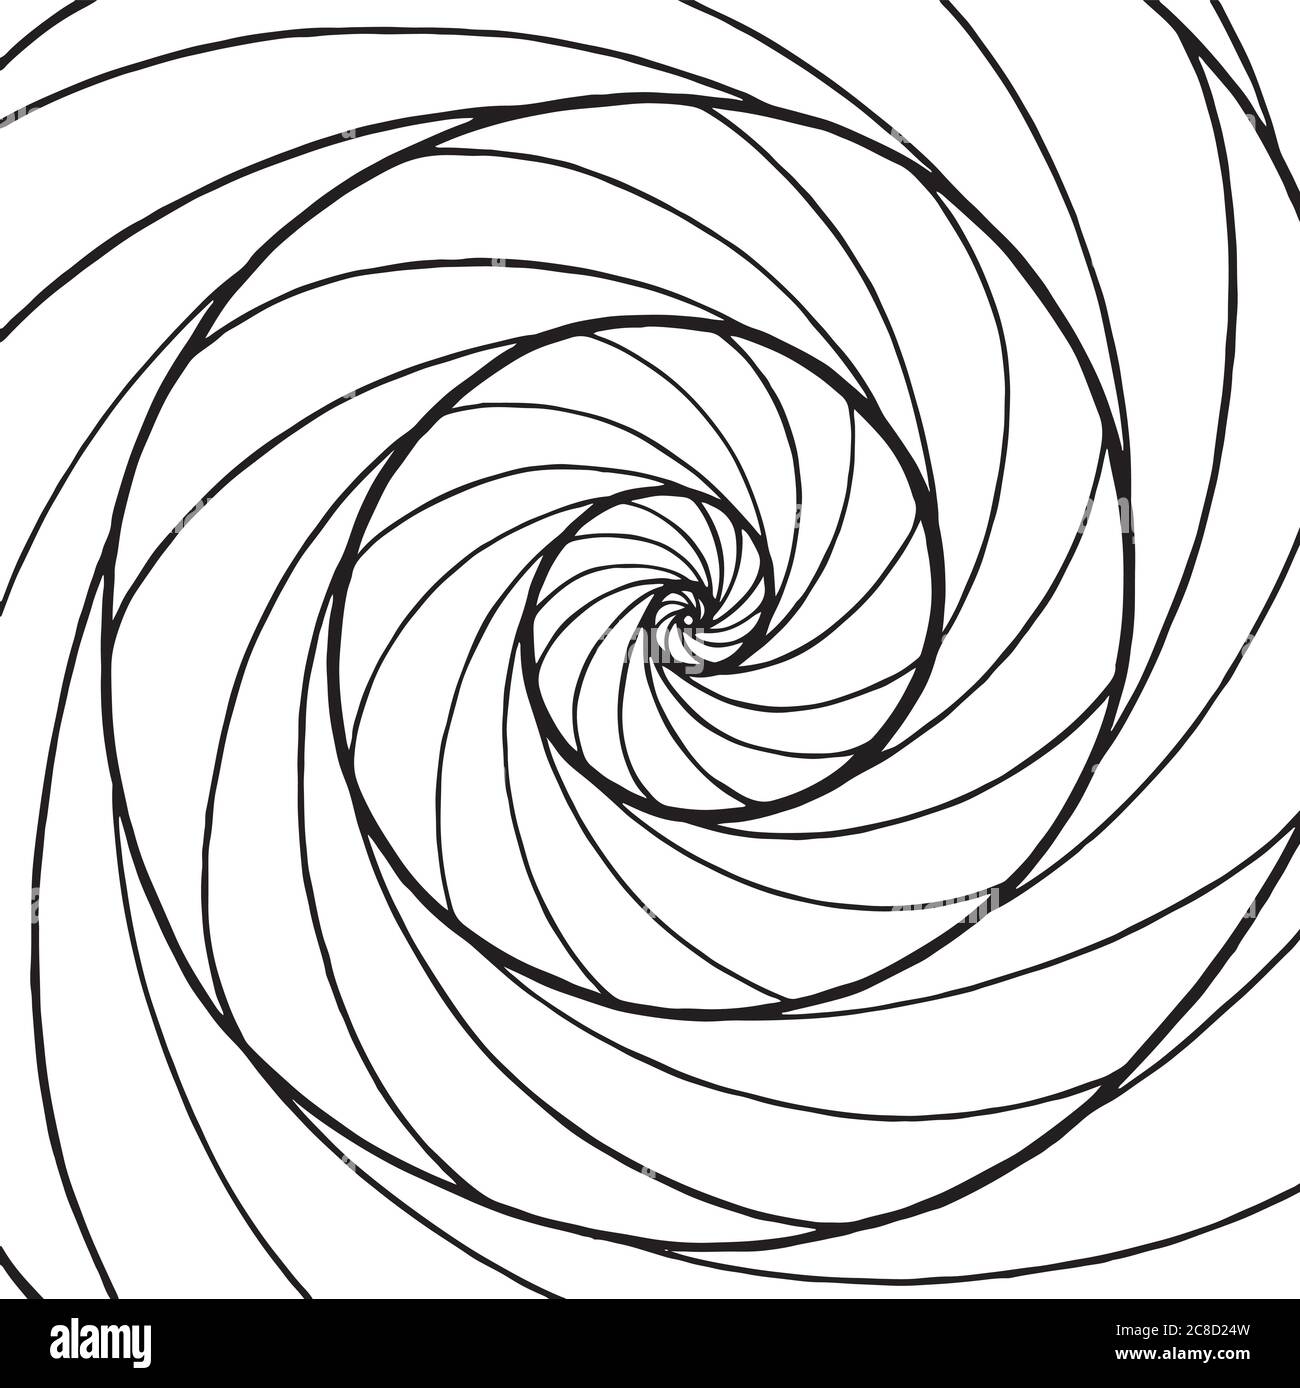 Ammonite shell spiral pattern. Outline graphic art. Ornament for background design and coloring books. Vector illustration Stock Vector